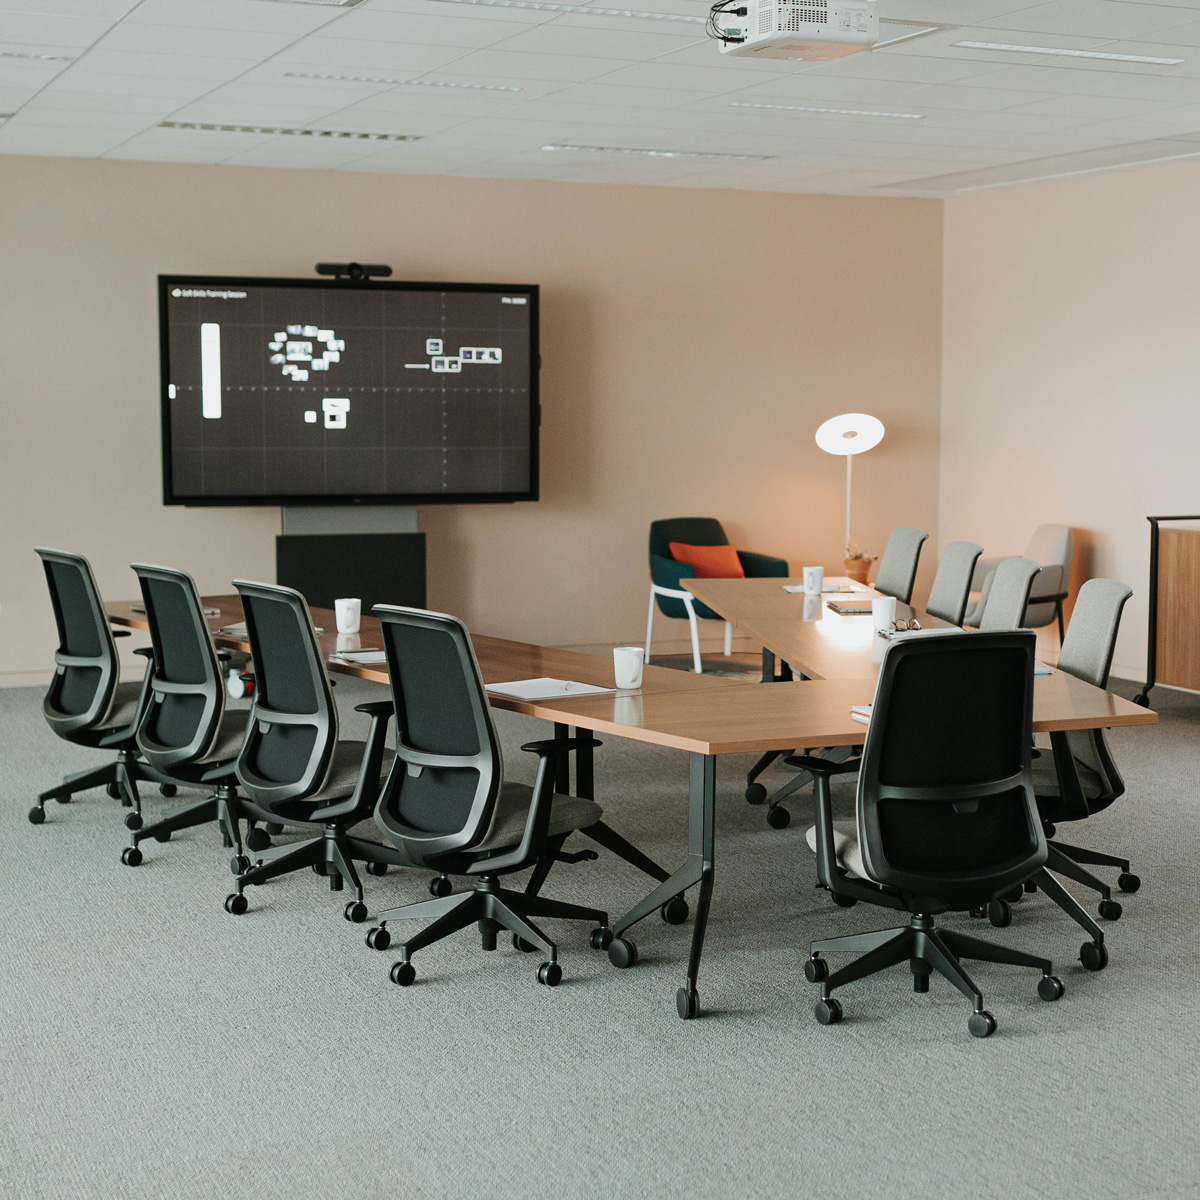 A large v-shaped table with lots of office chairs facing a monitor on the wall